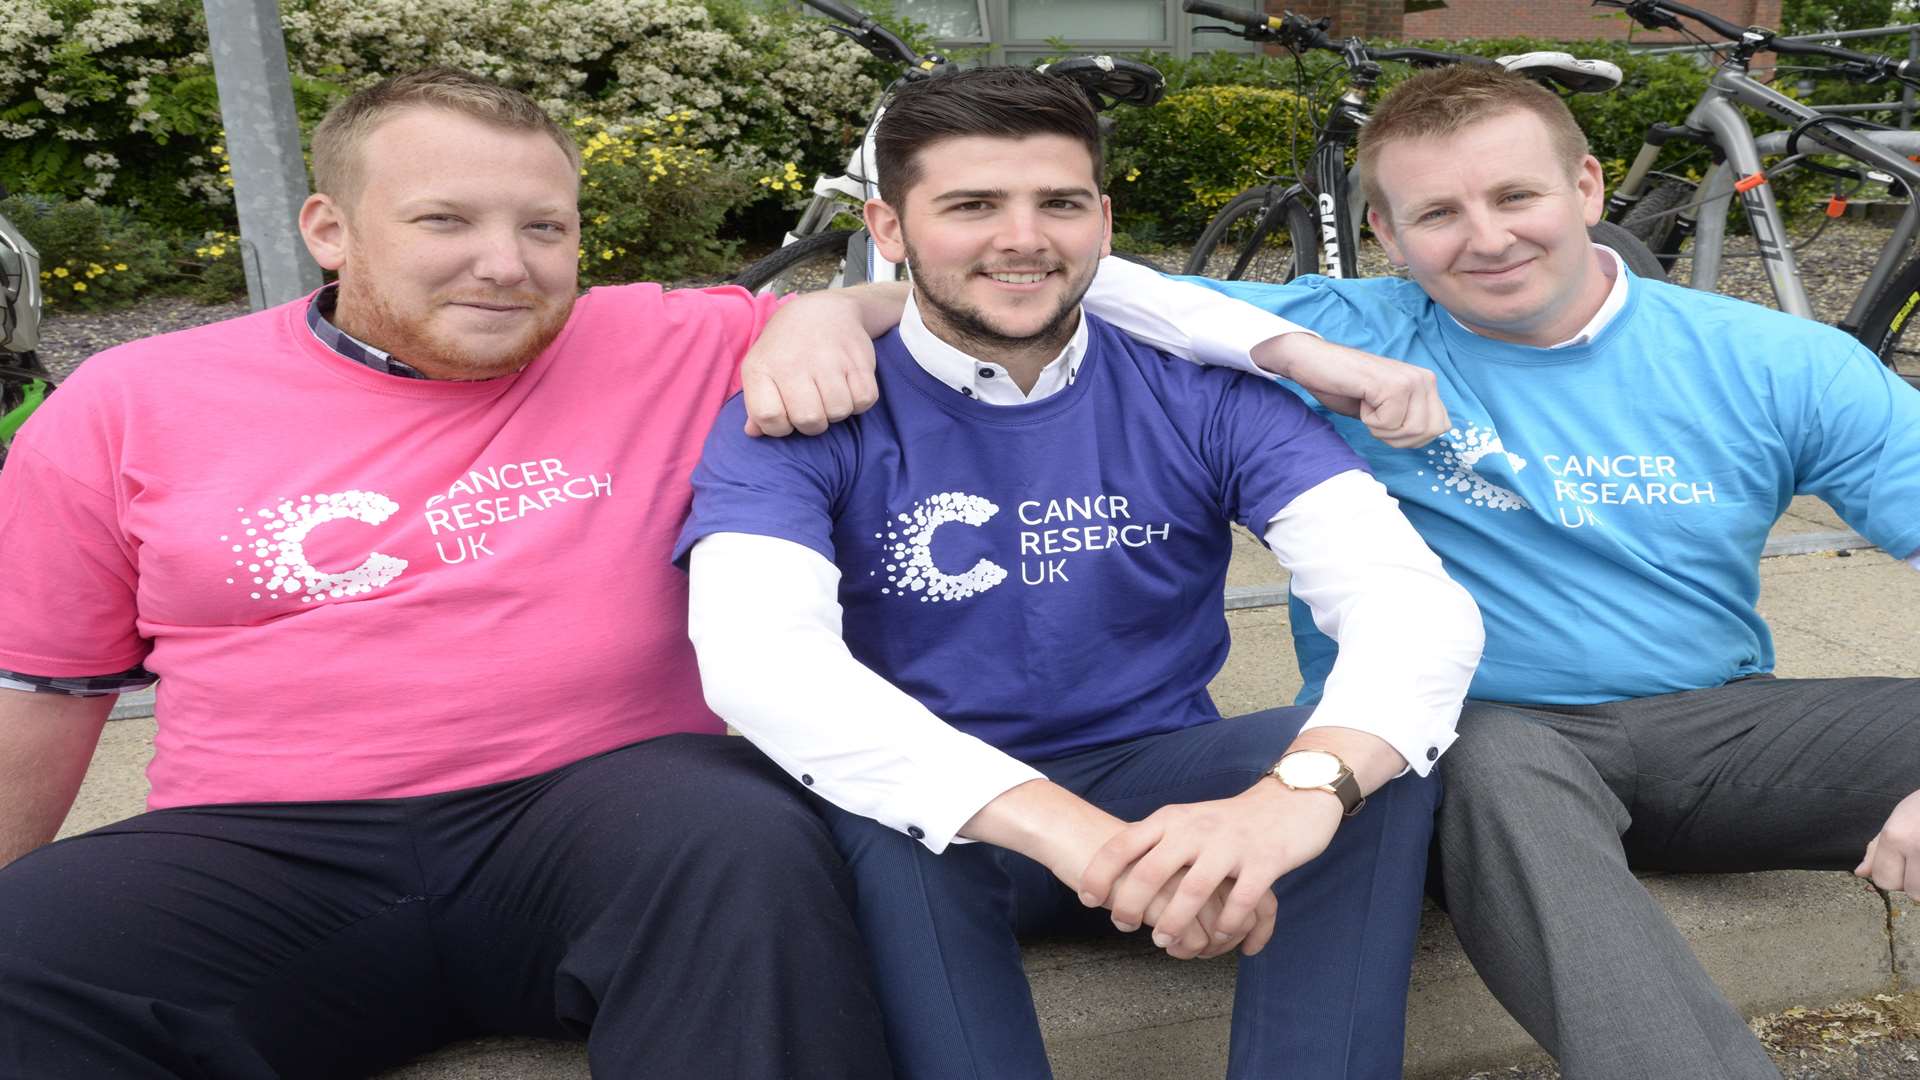 Ashley Robinson, Dan Wanstall and Daniel York set to cycle 100 miles for Cancer Research. Picture: Chris Davey